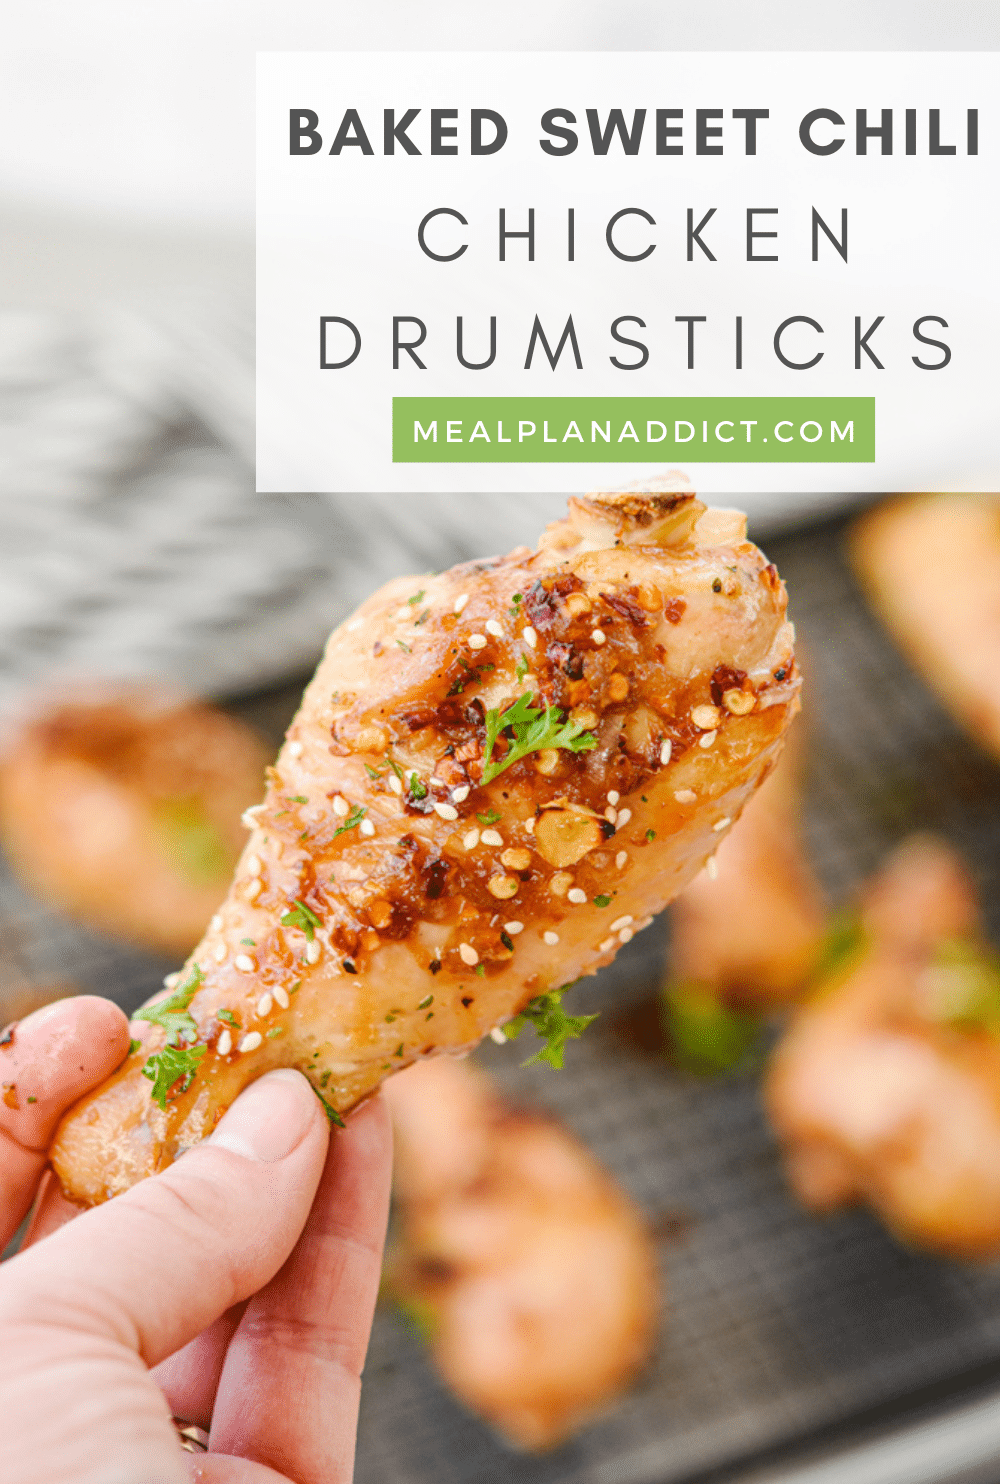 Sweet Chili Baked Chicken Drumsticks | Meal Plan Addict